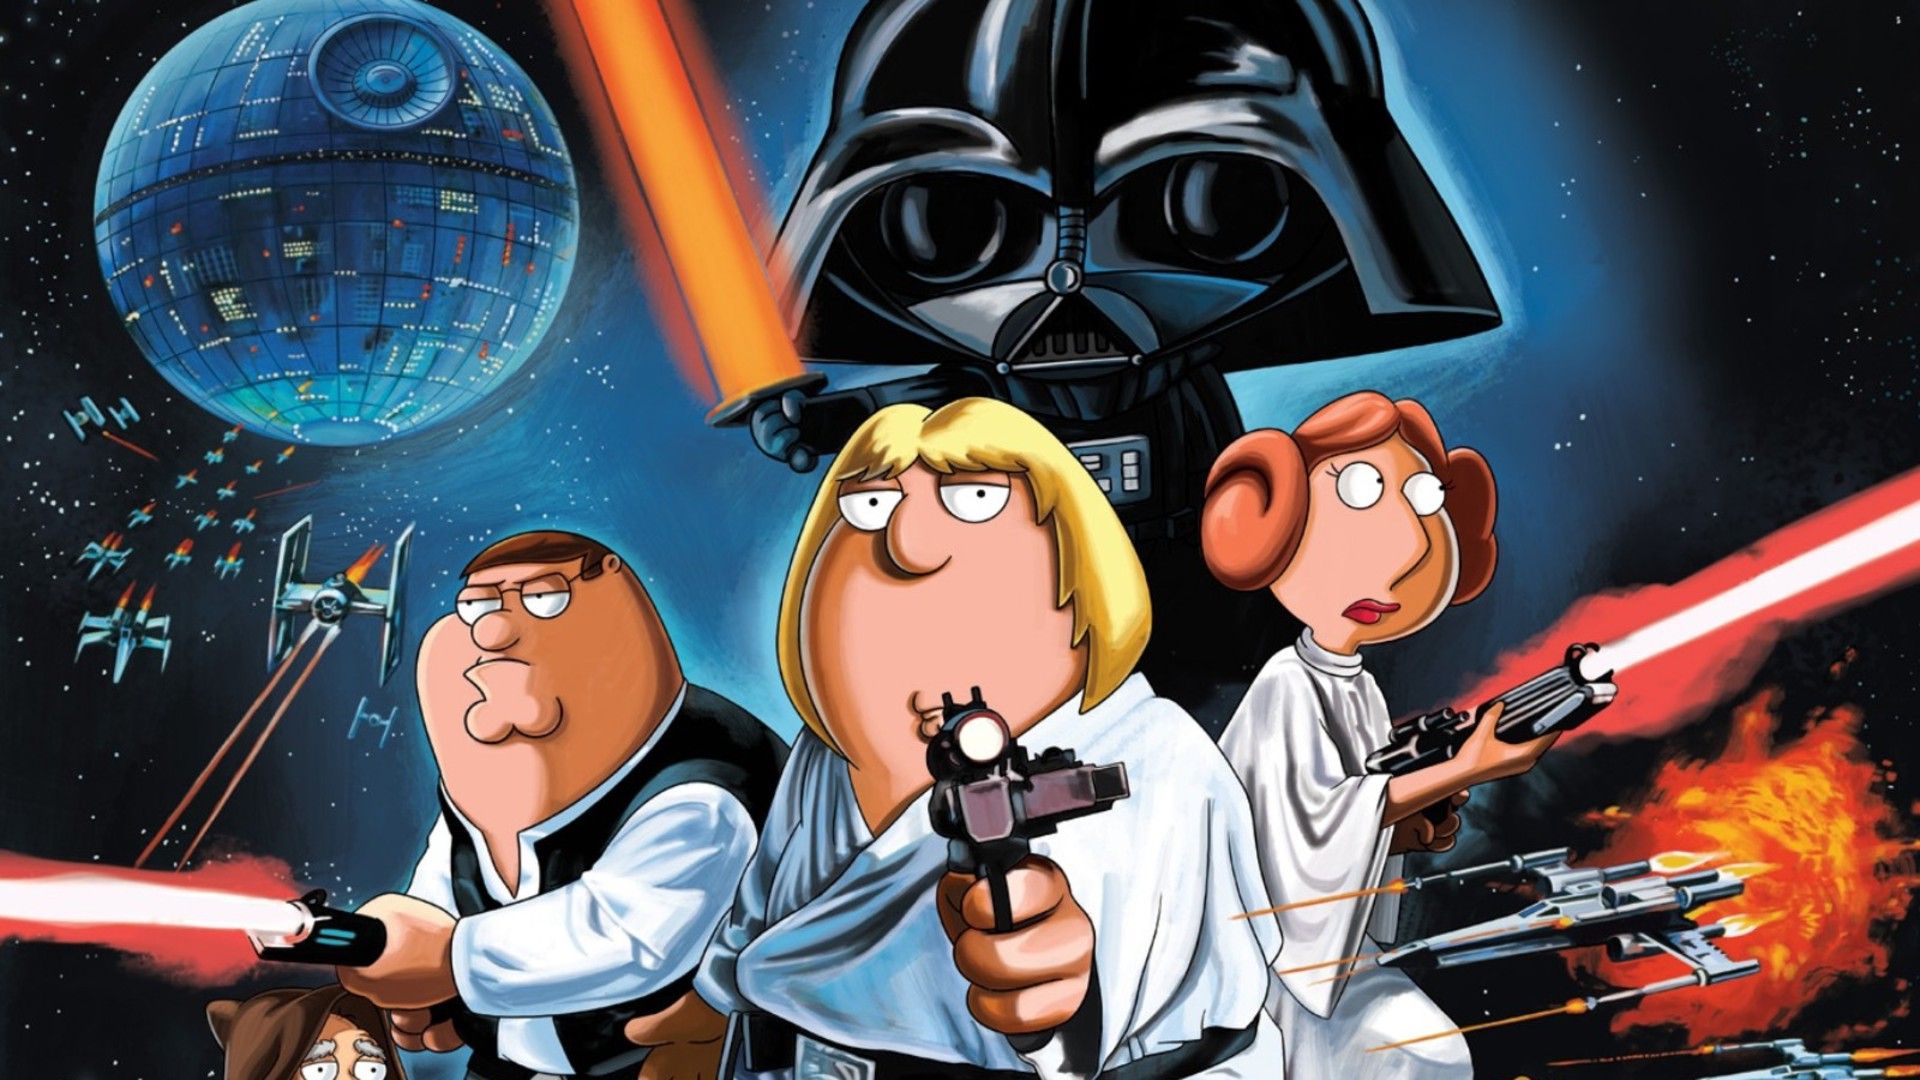 Star Wars Tributes / Parodies to Watch to Celebrate Star Wars Day (May the 4th)!